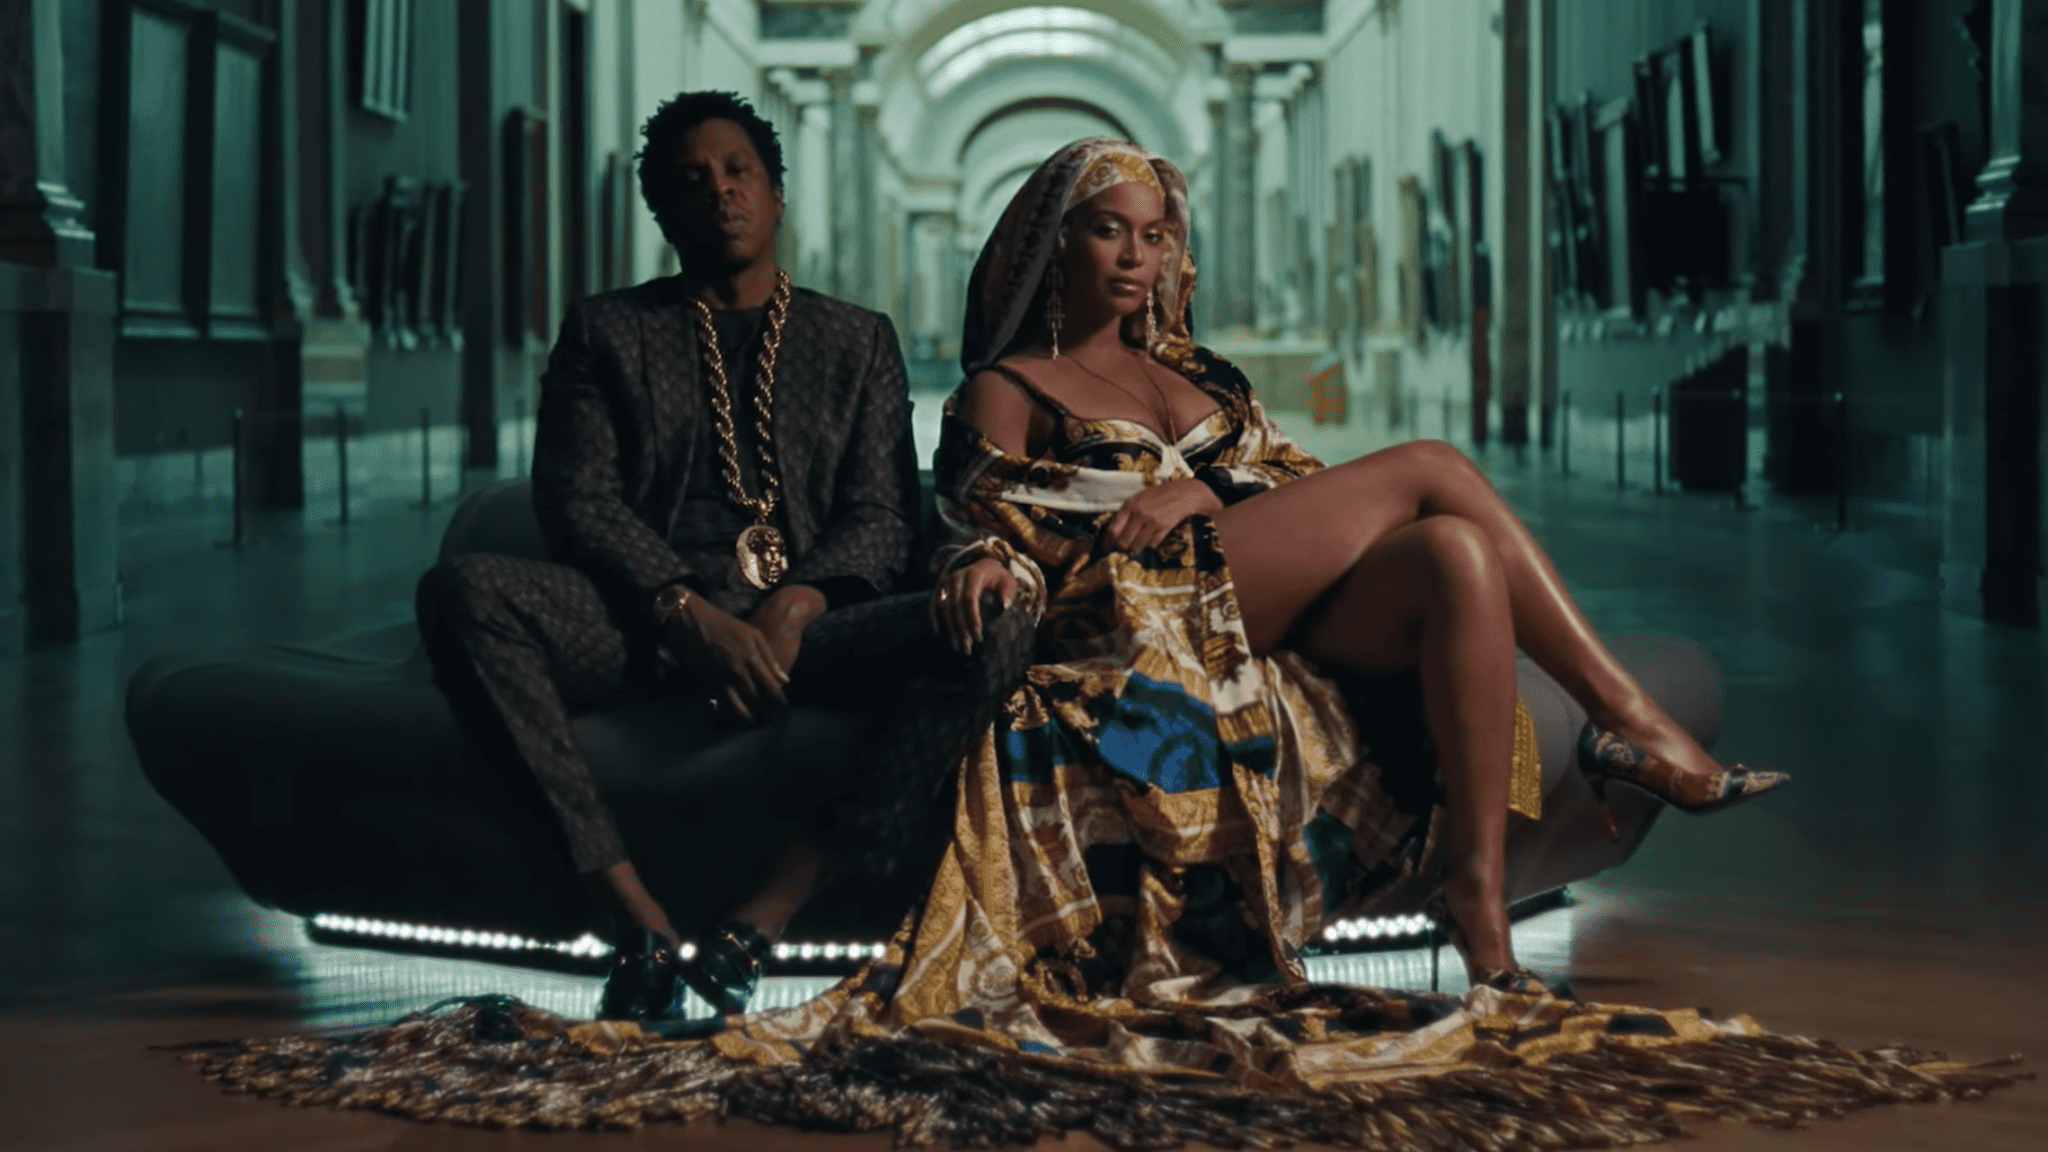 the carters